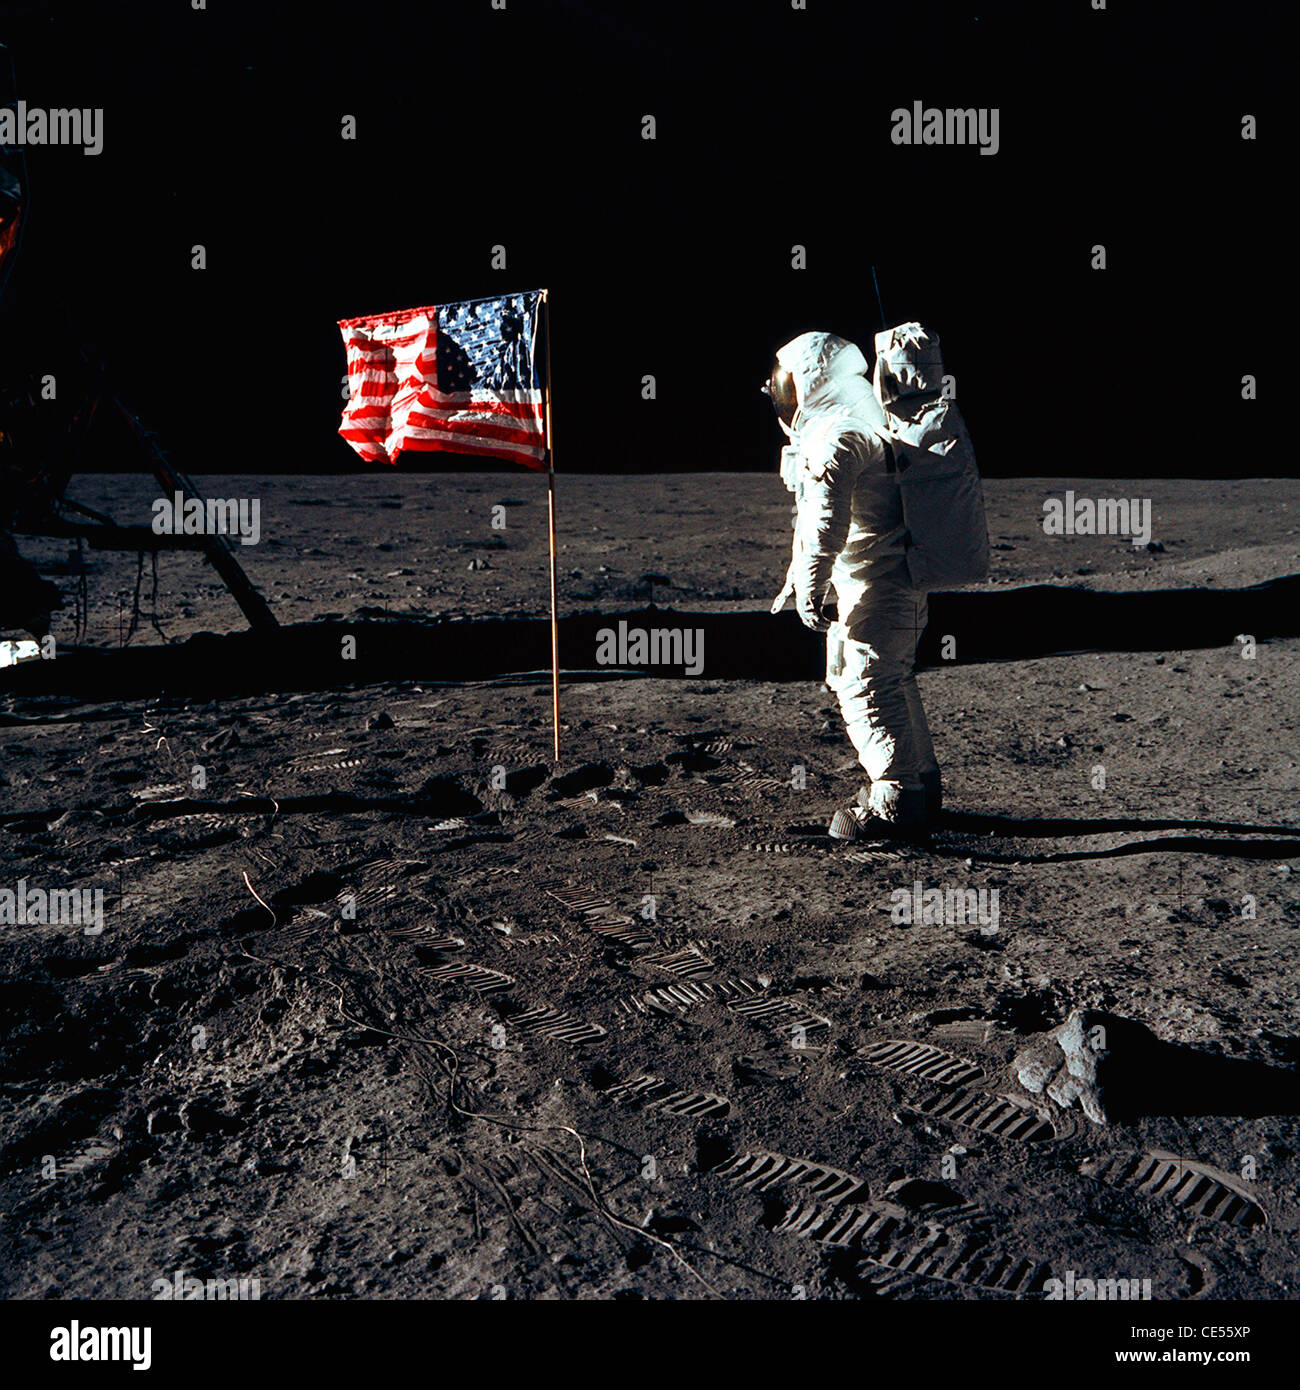 Buzz Aldrin, the pilot of the first lunar landing mission, with an American flag during Apollo 11 on the moon Stock Photo